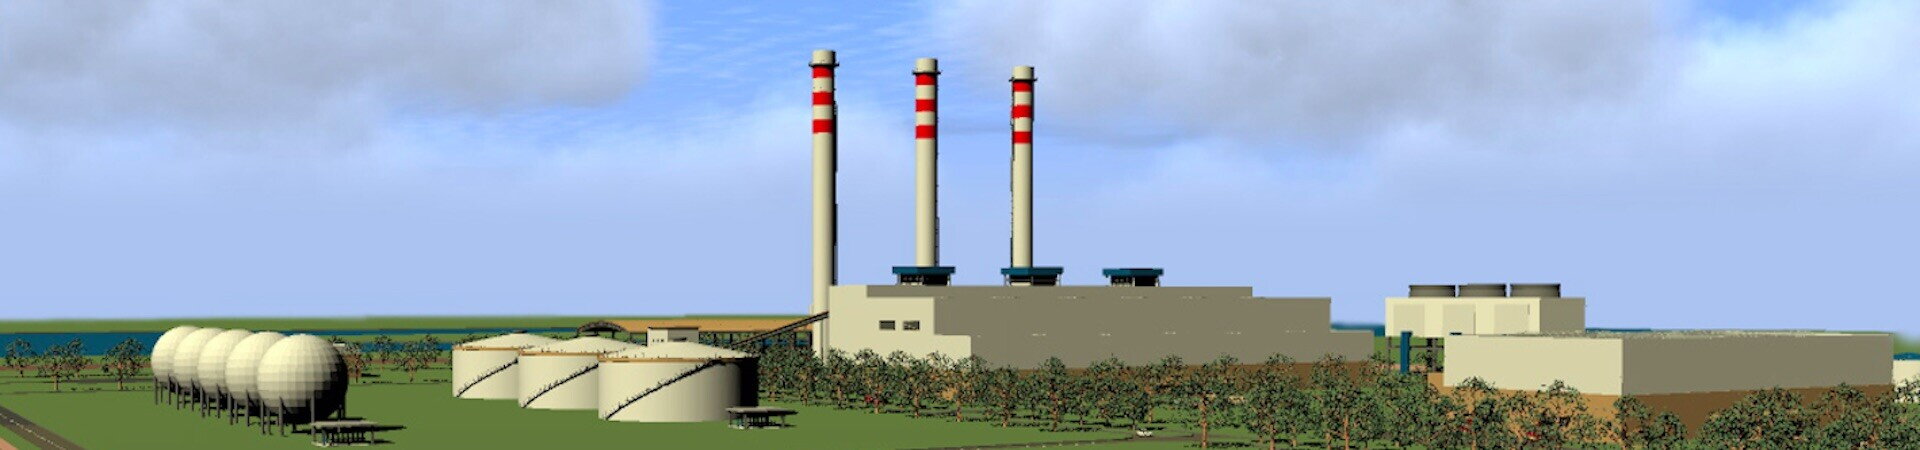 <p><span style="color: #ffffff;">10 MWh Integrated Gasification Combined Cycle<br/> Power Plant</span></p>